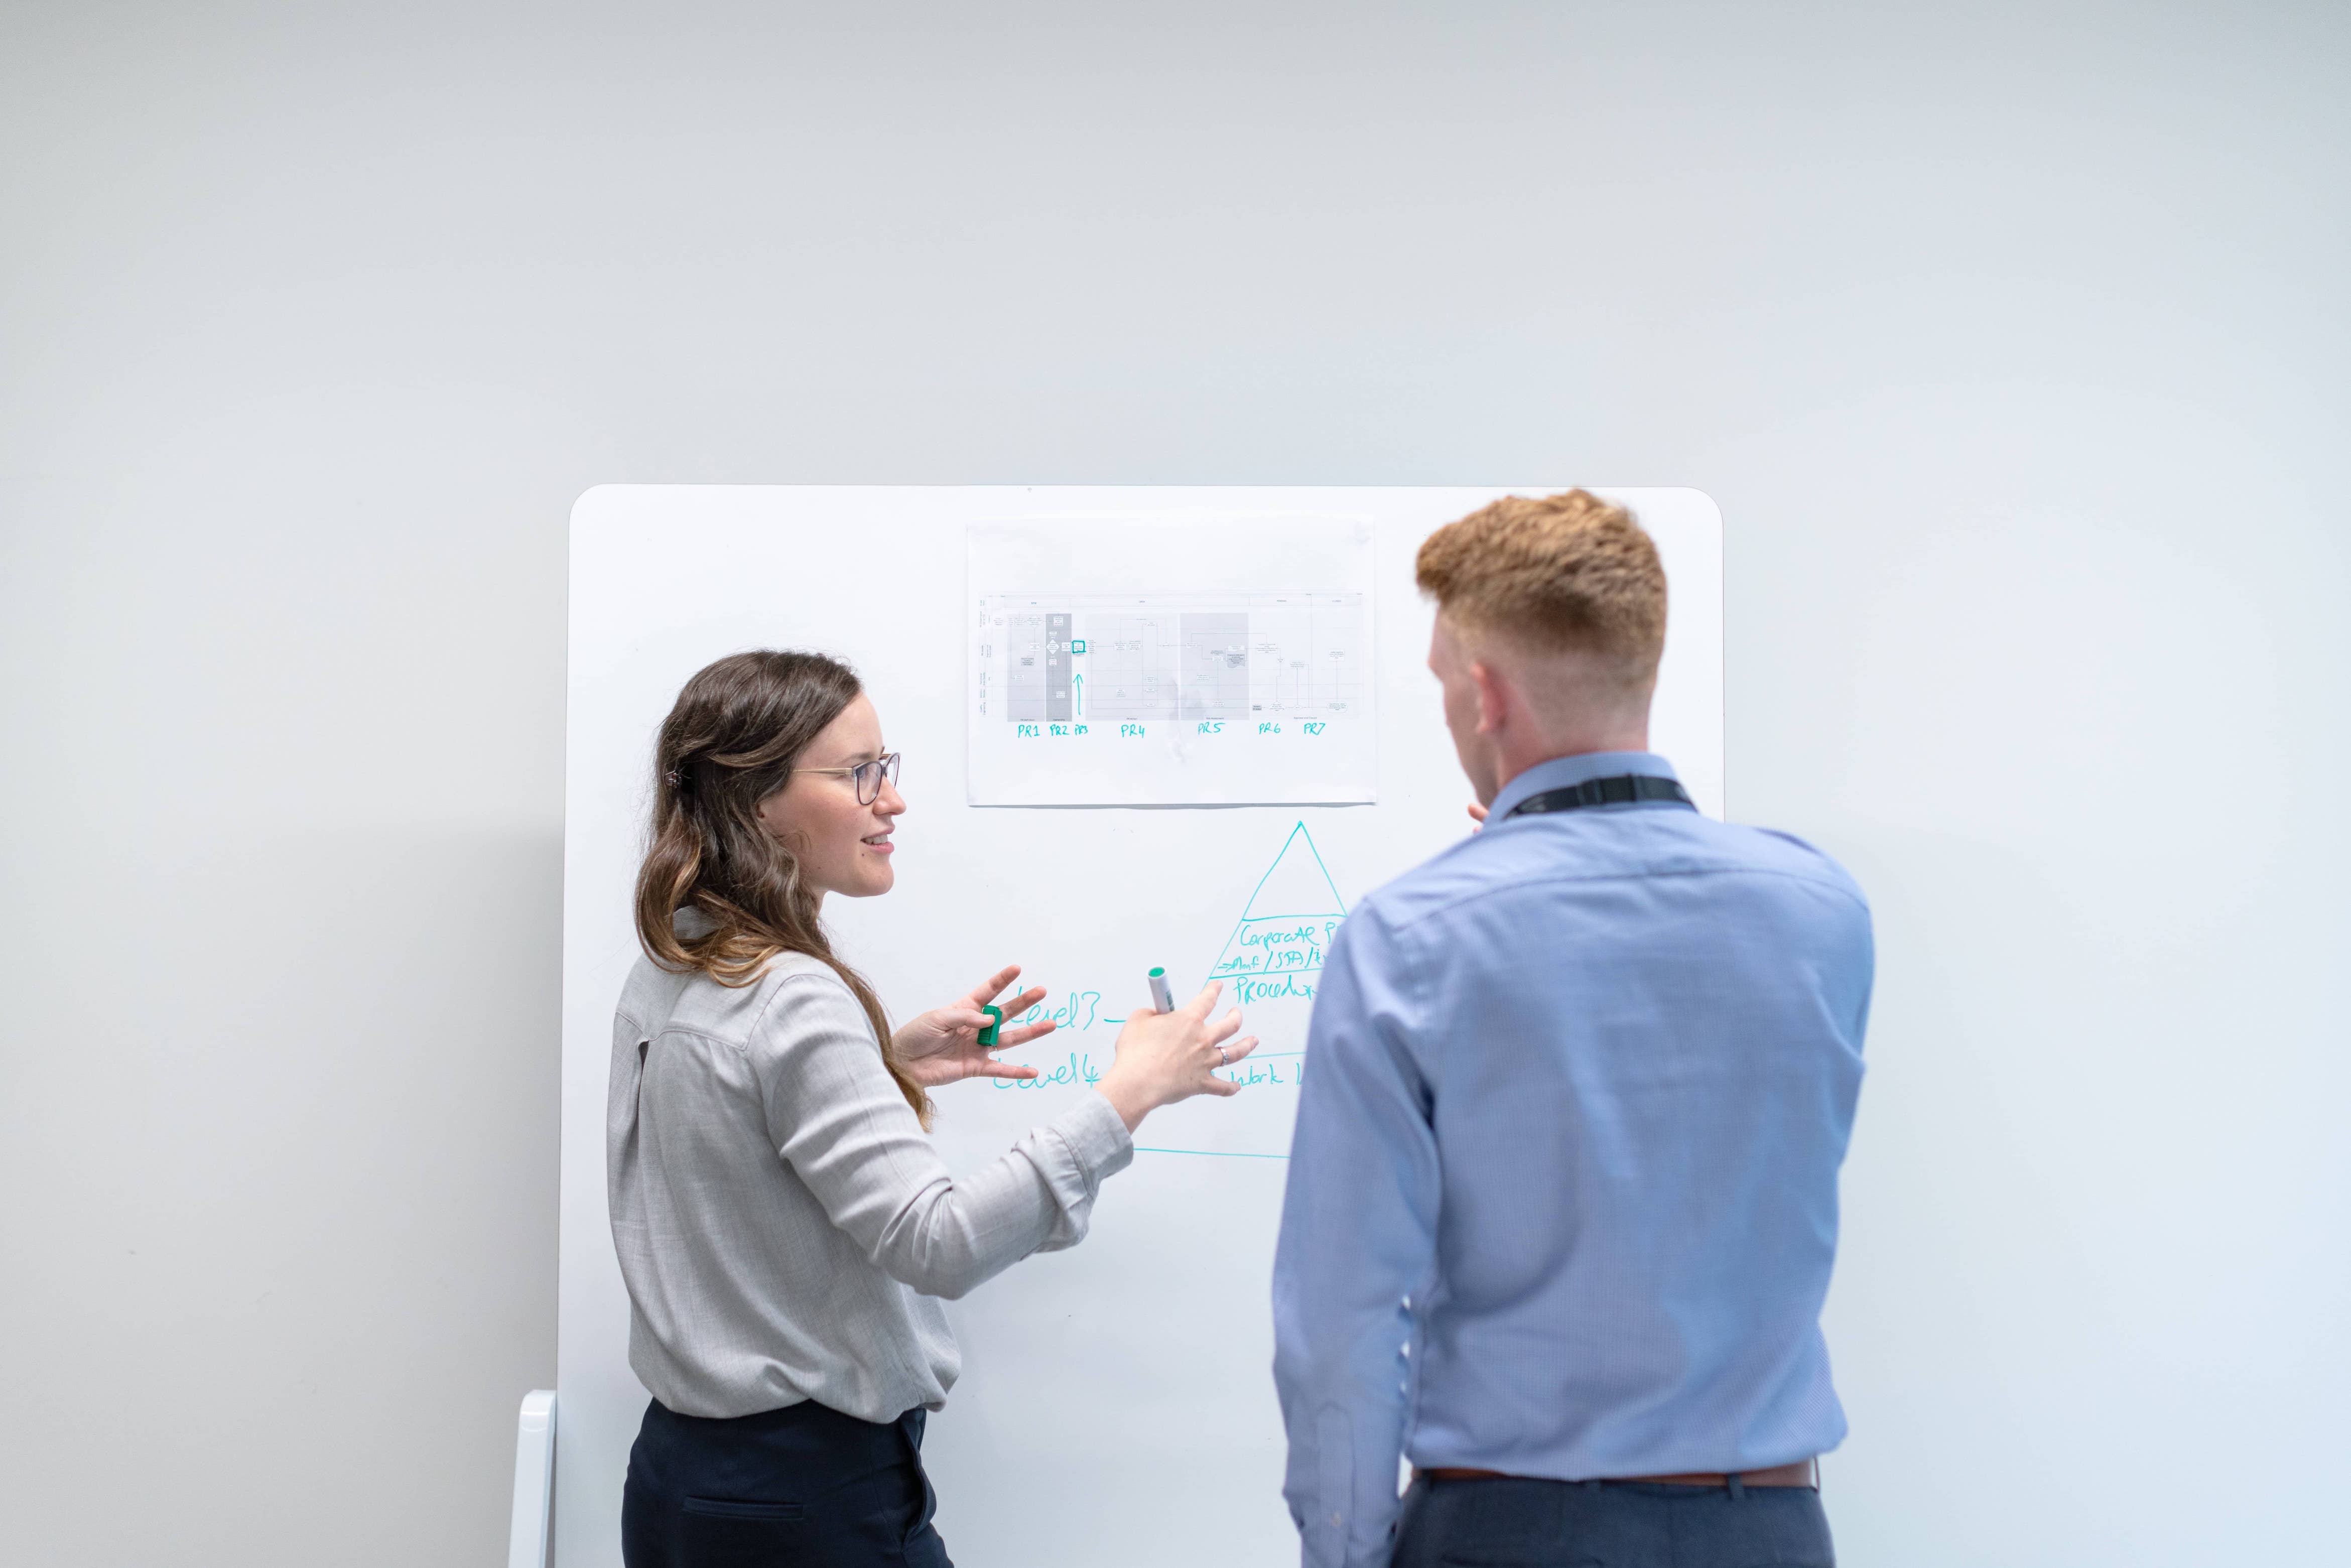 Two people perform a capabilities and gaps assessment at a whiteboard.